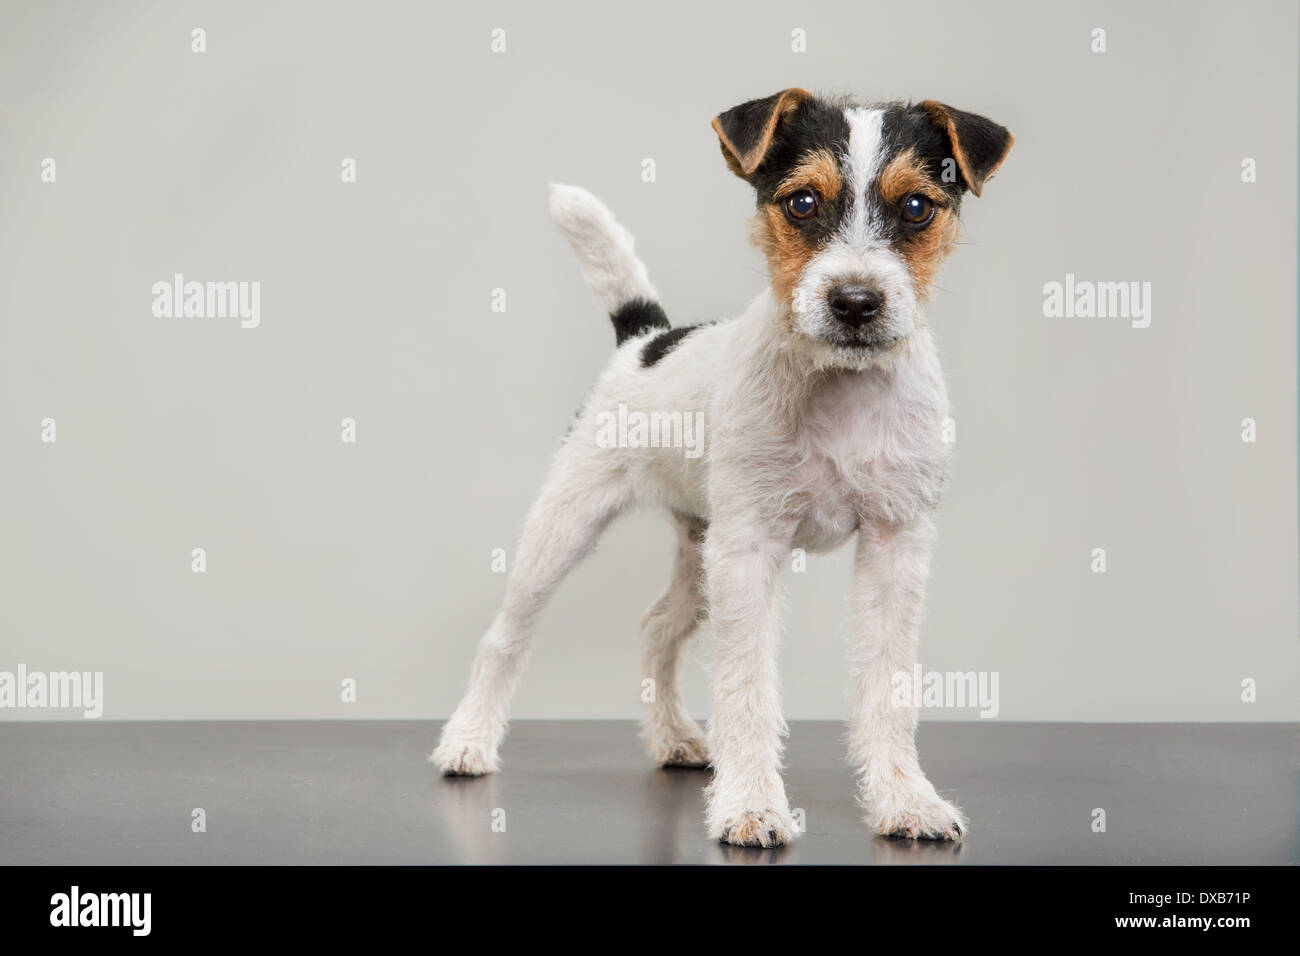 Studio portrait of Jack Russell Terrier puppy standing, staring at camera. Stock Photo